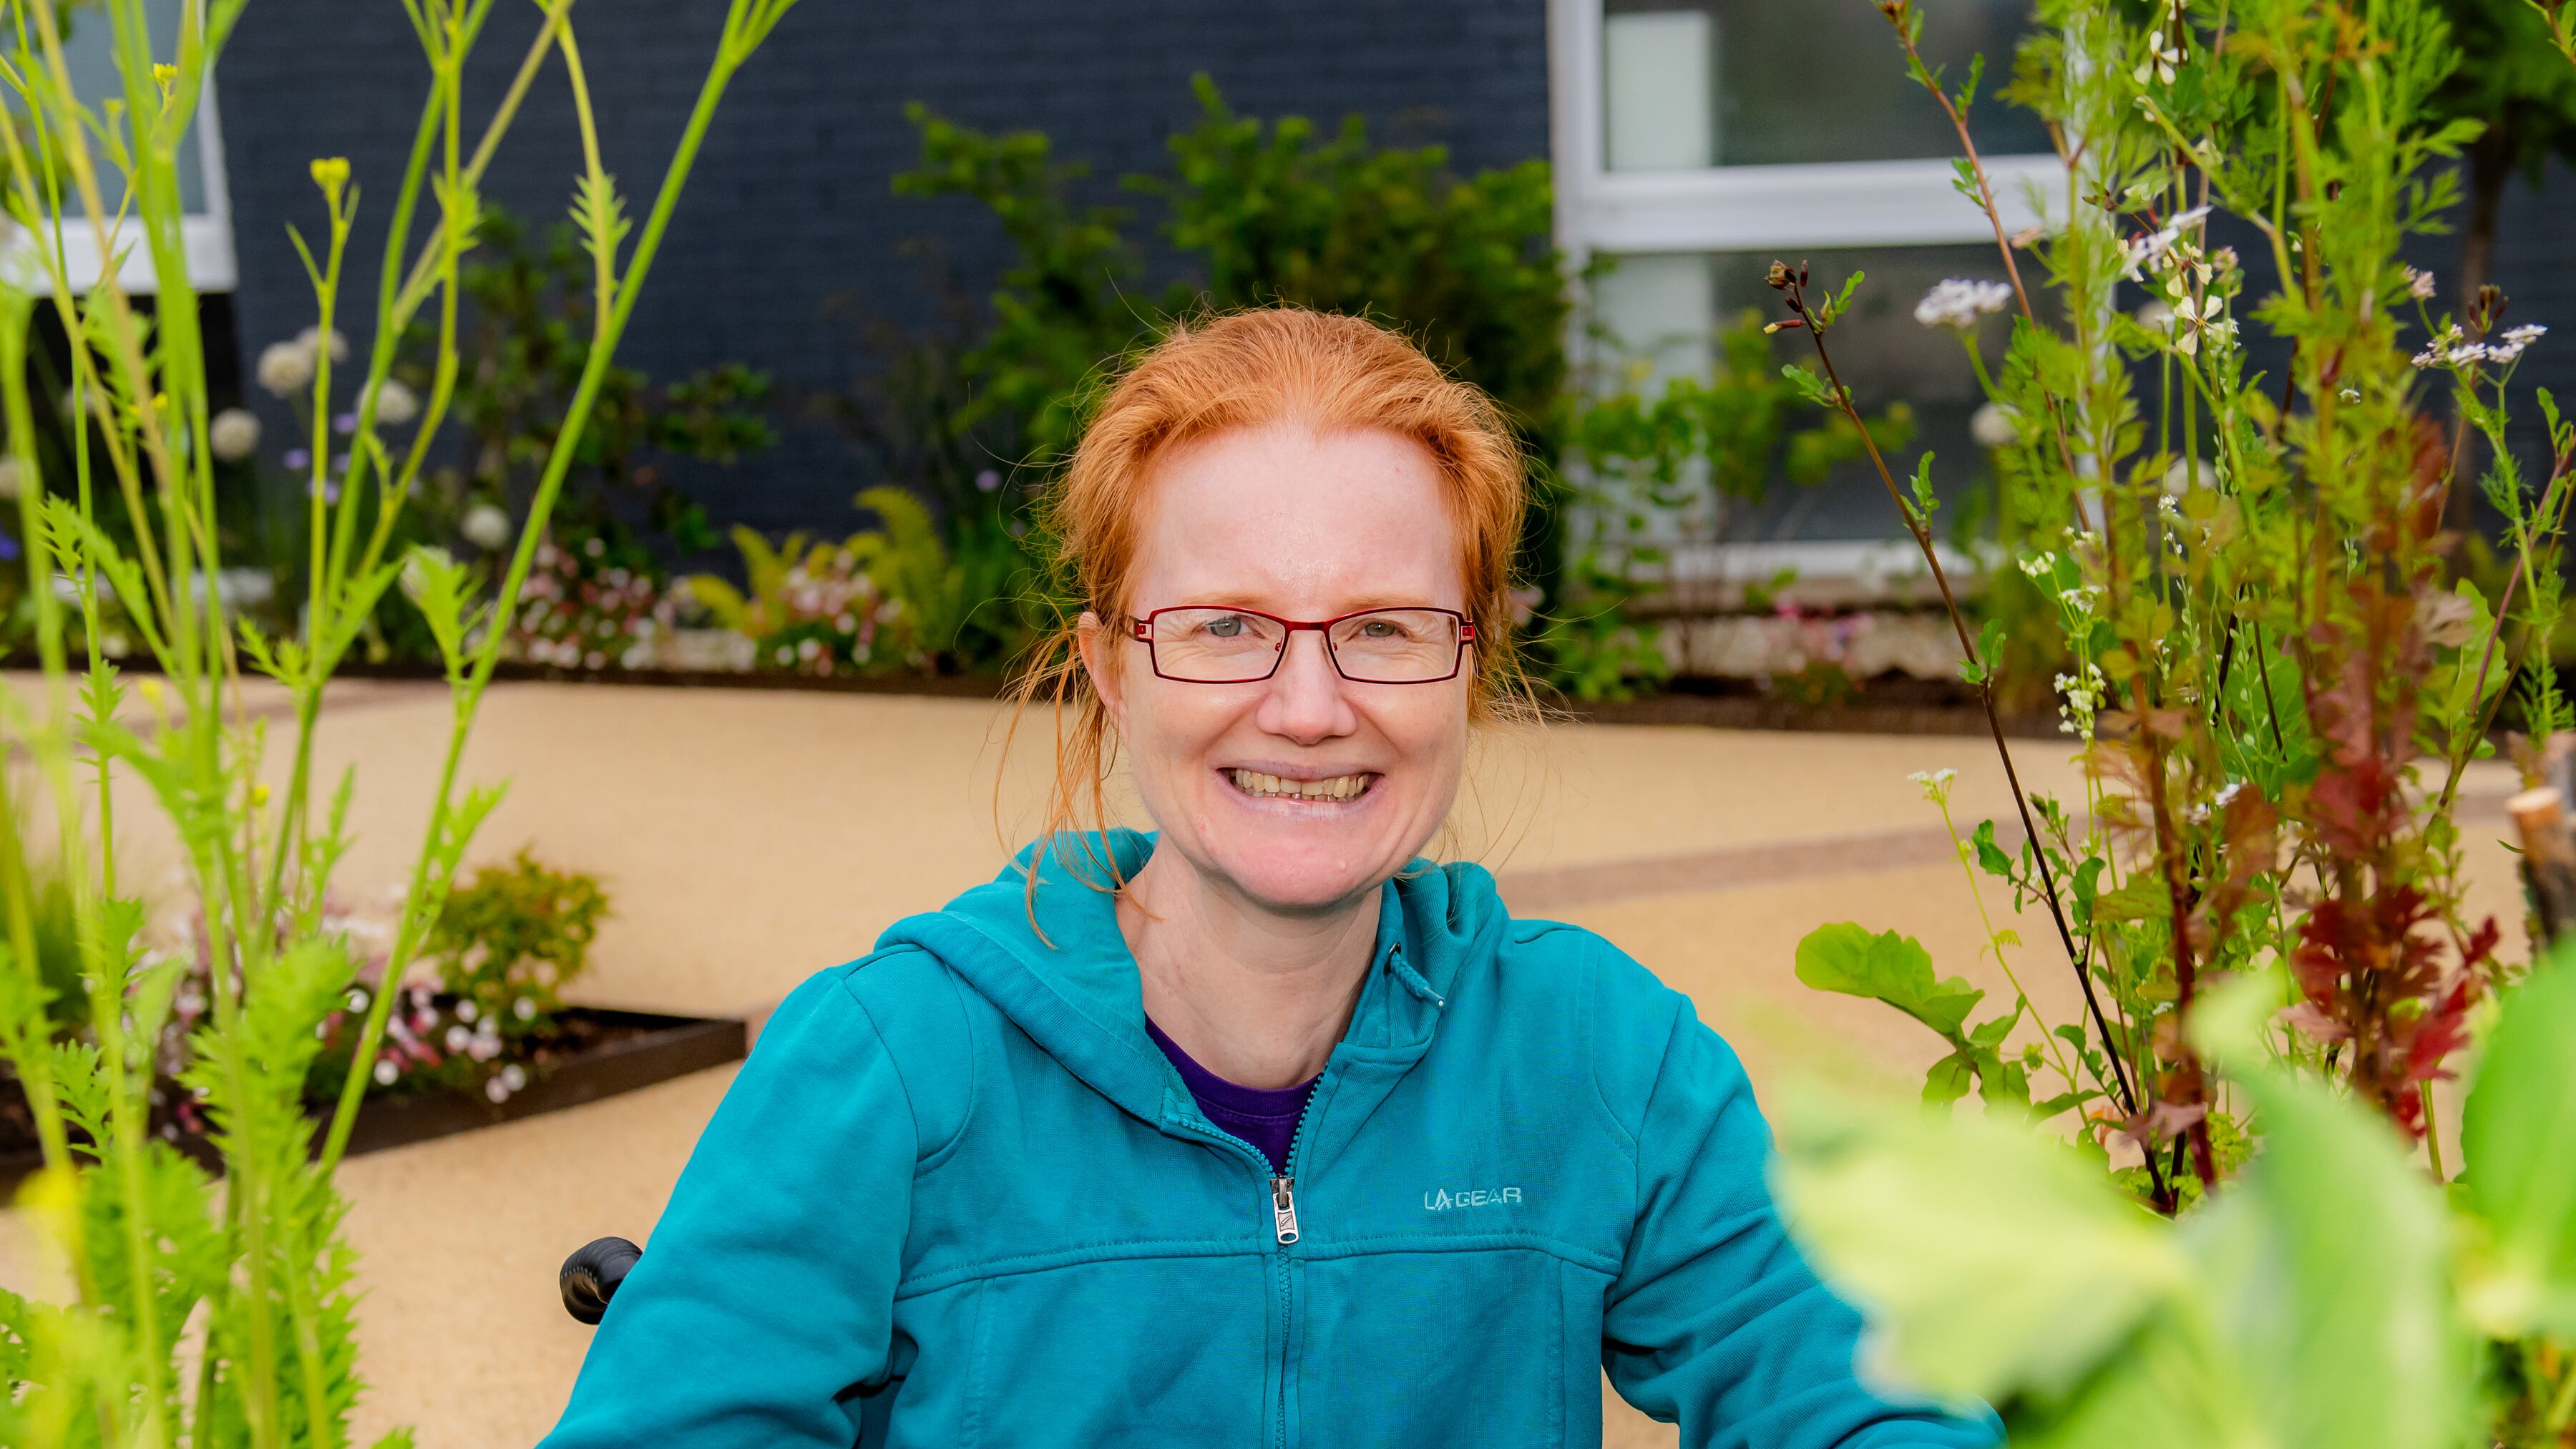 Co Down vet, Ina Doherty, a patient in the Spinal Cord Injuries Unit at Musgrave Park Hospital, taking part in some horticulture therapy in the newly opened Horatio's Garden Northern Ireland